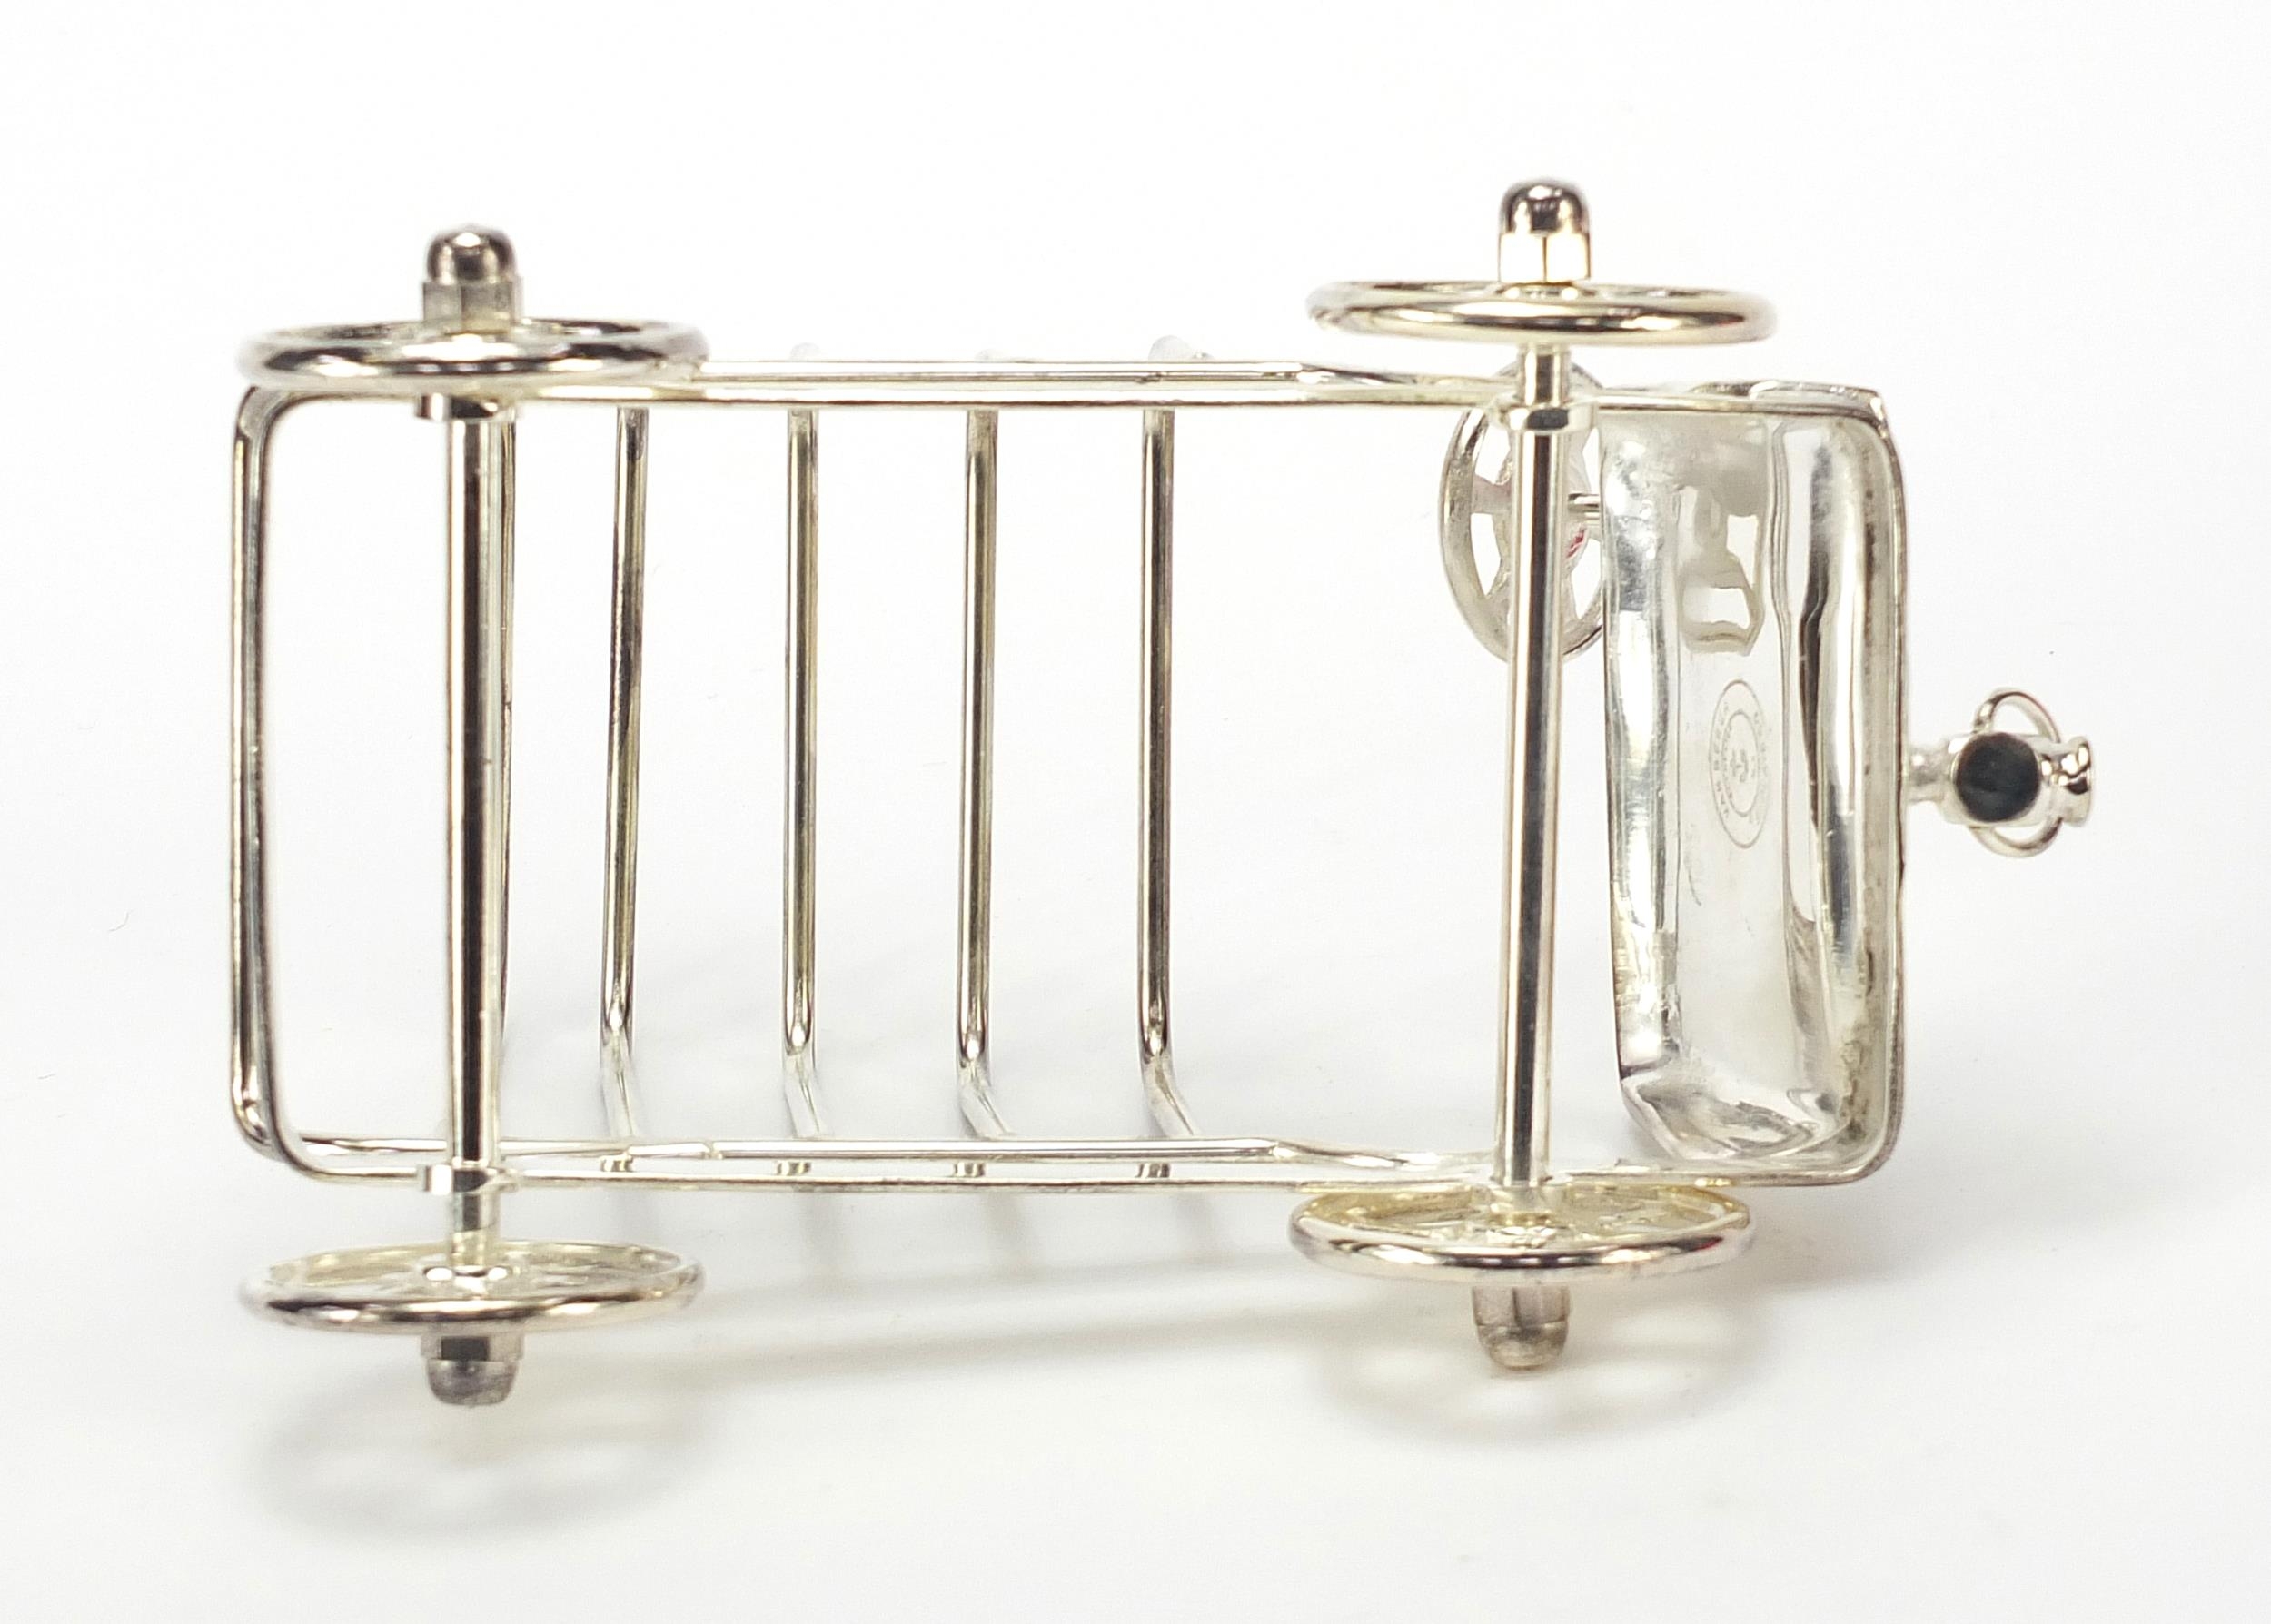 Novelty silver plated five slice toast rack in the form of a car with rotating wheels, 15.5cm in - Image 3 of 4